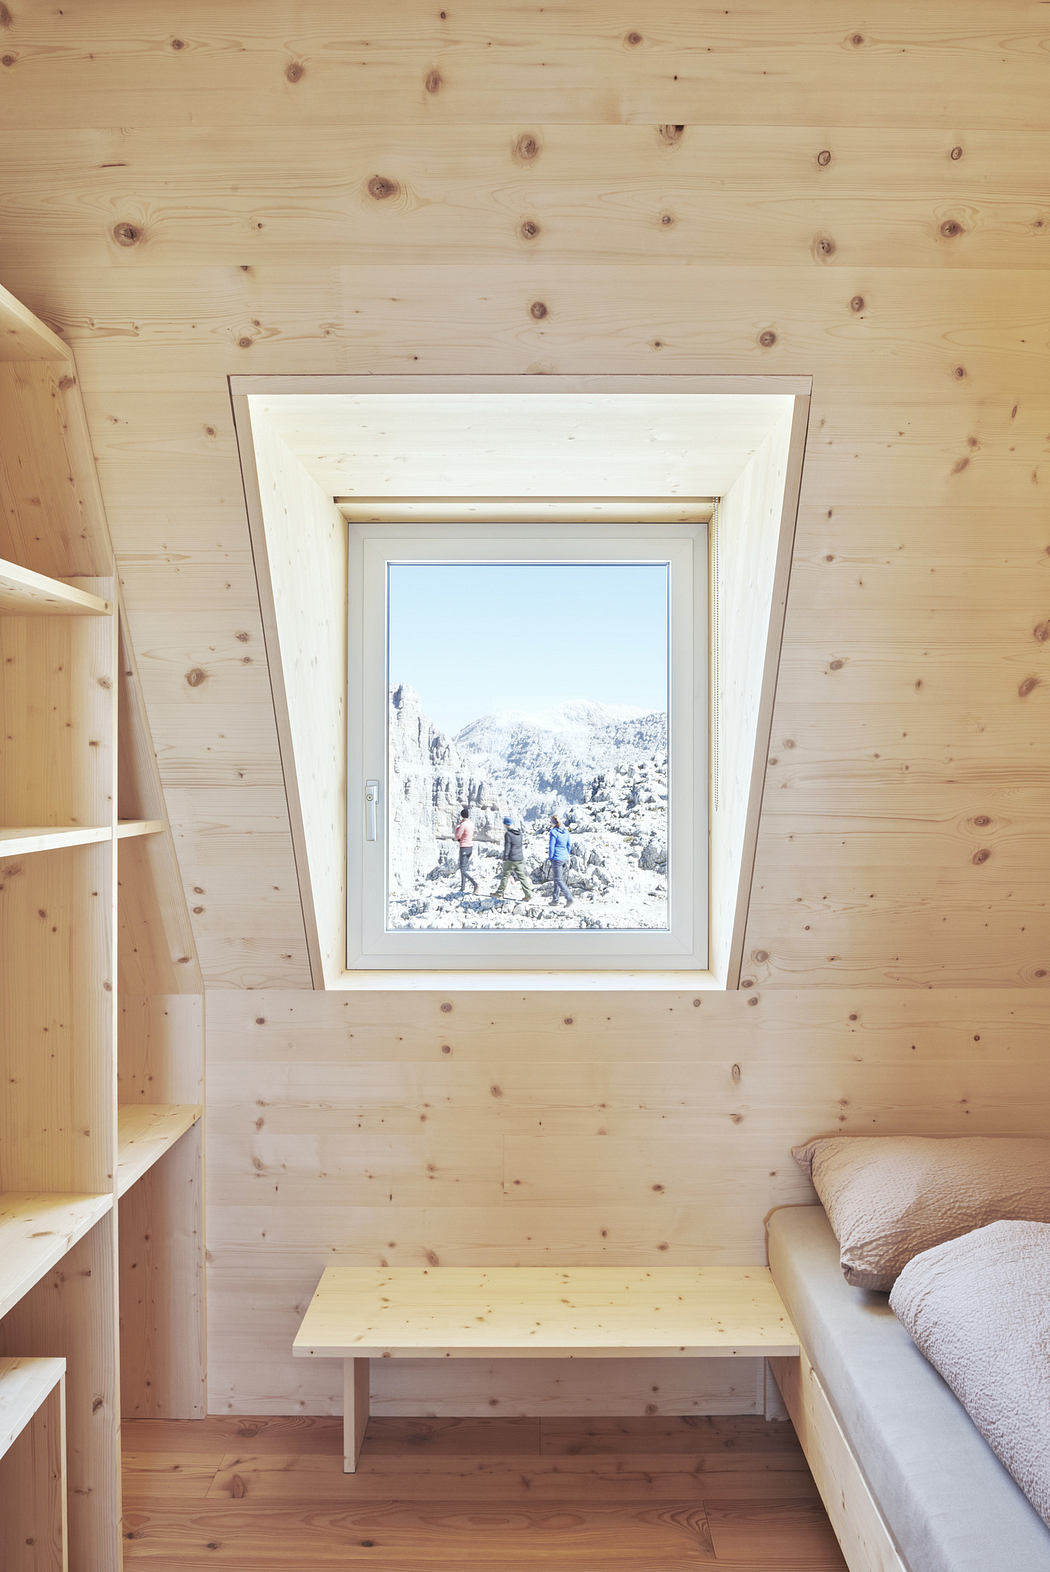 Cozy wooden interior with a window view of snowy landscape.